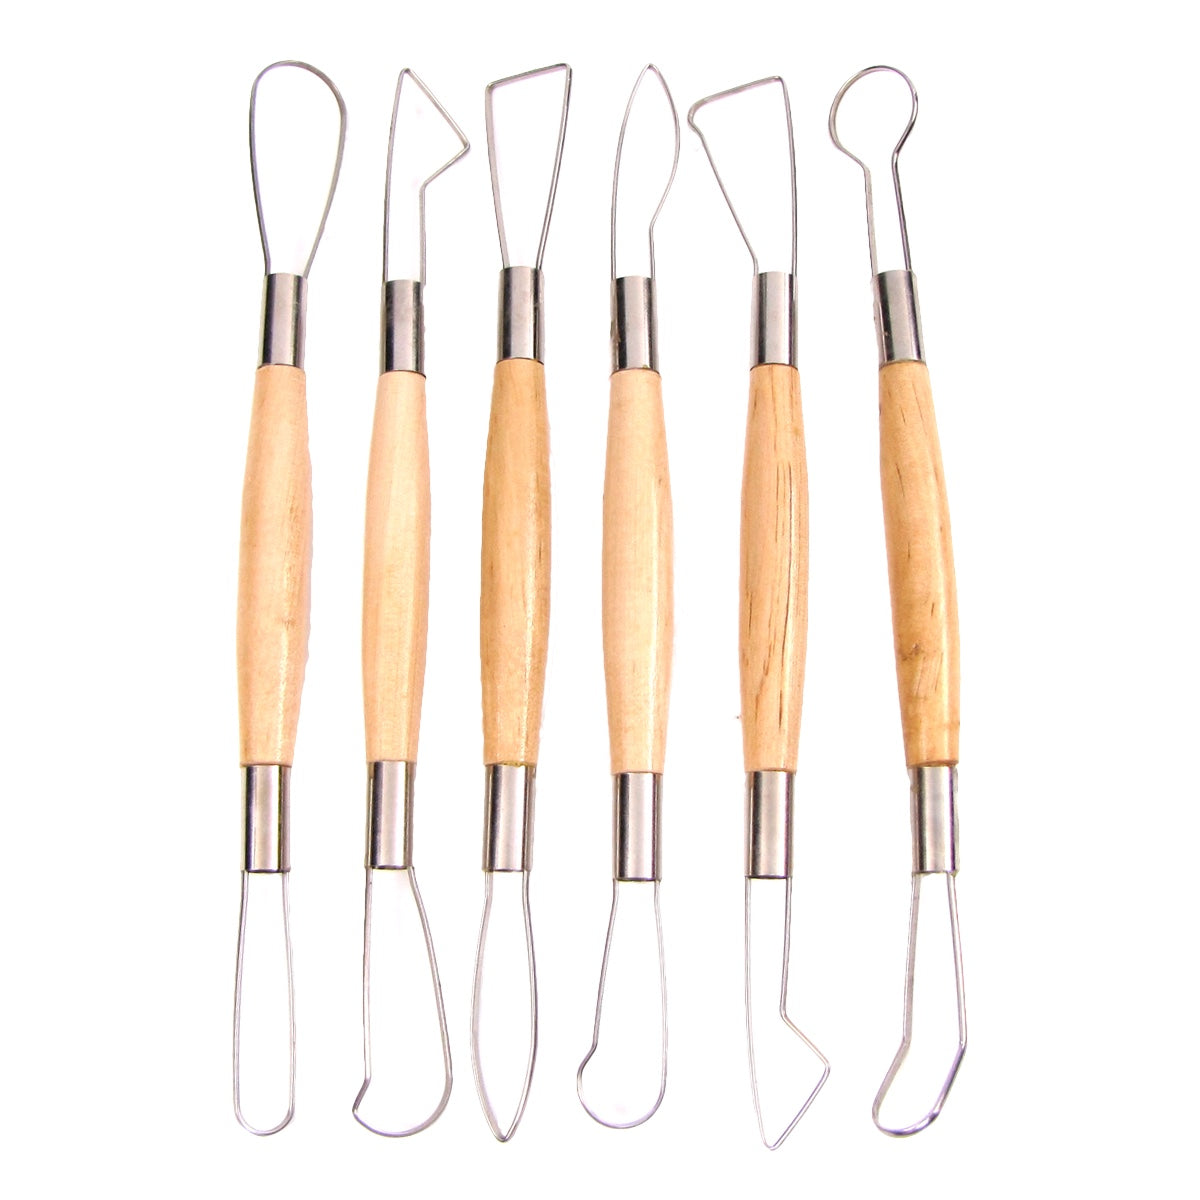 Wax Modeling Polymer Clay Carving Tools 6pc 8 Sculpting Tool Set